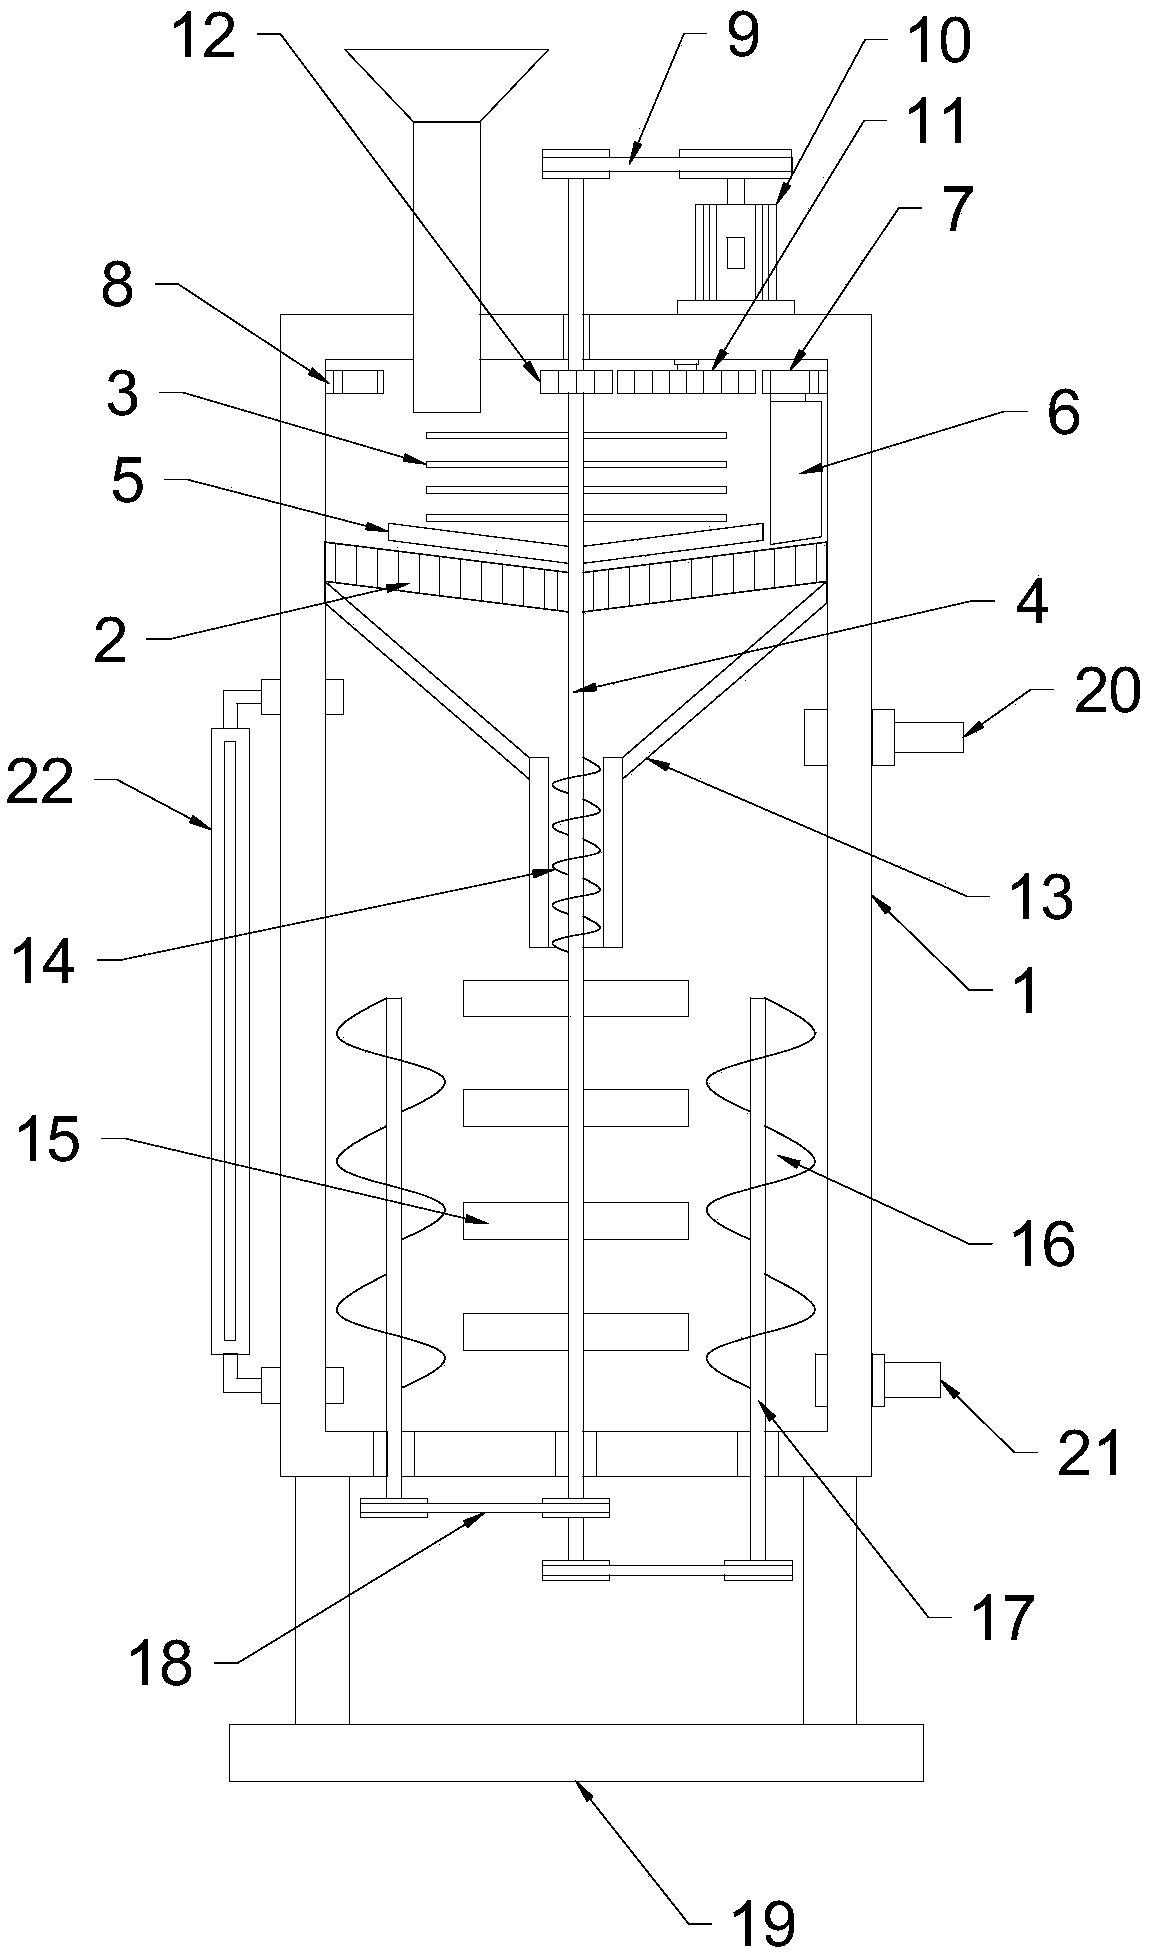 Solid-liquid reaction device with grinding function